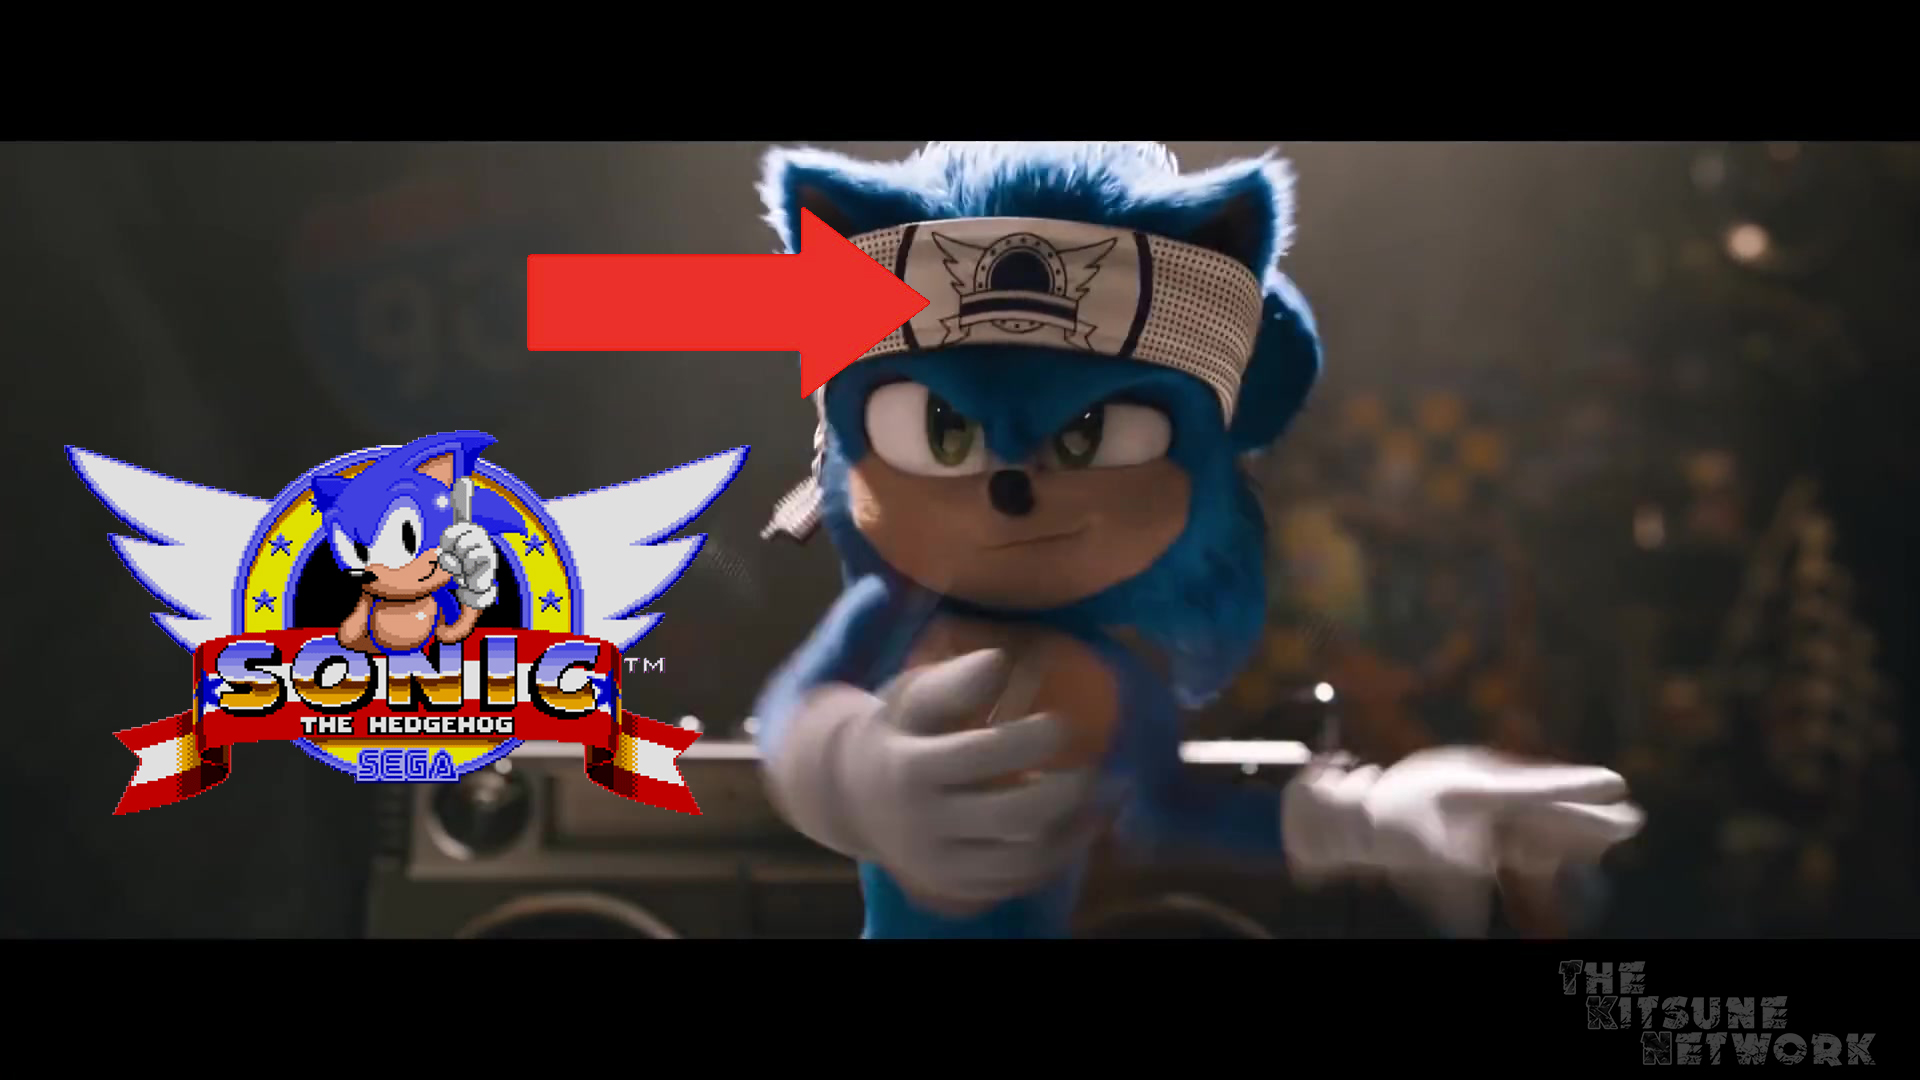 Sonic-the-Hedgehog-NEW-Trailer-(2020)--Movieclips-Trailers-021